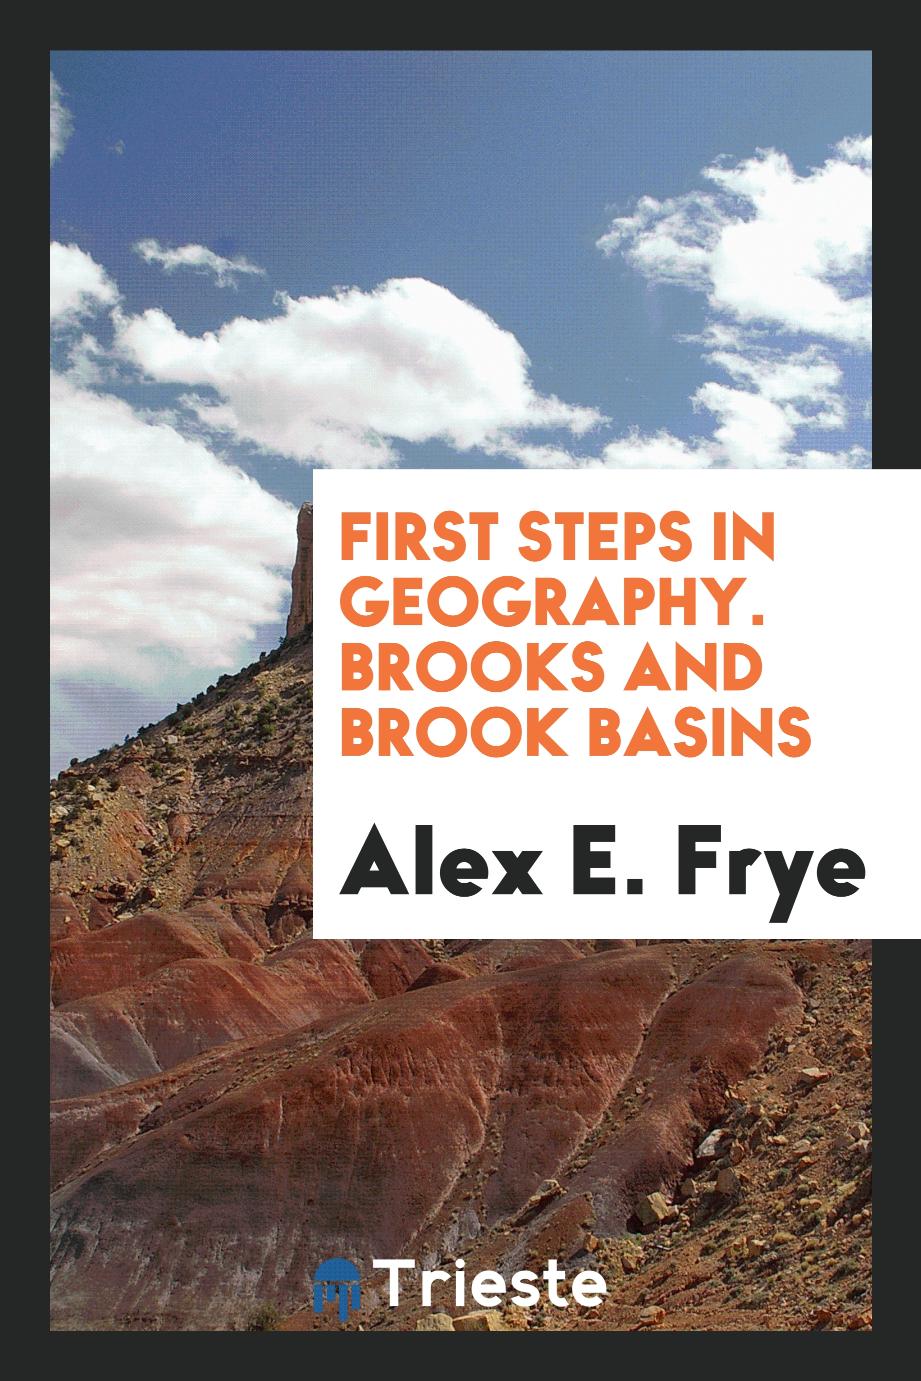 First Steps in Geography. Brooks and Brook Basins